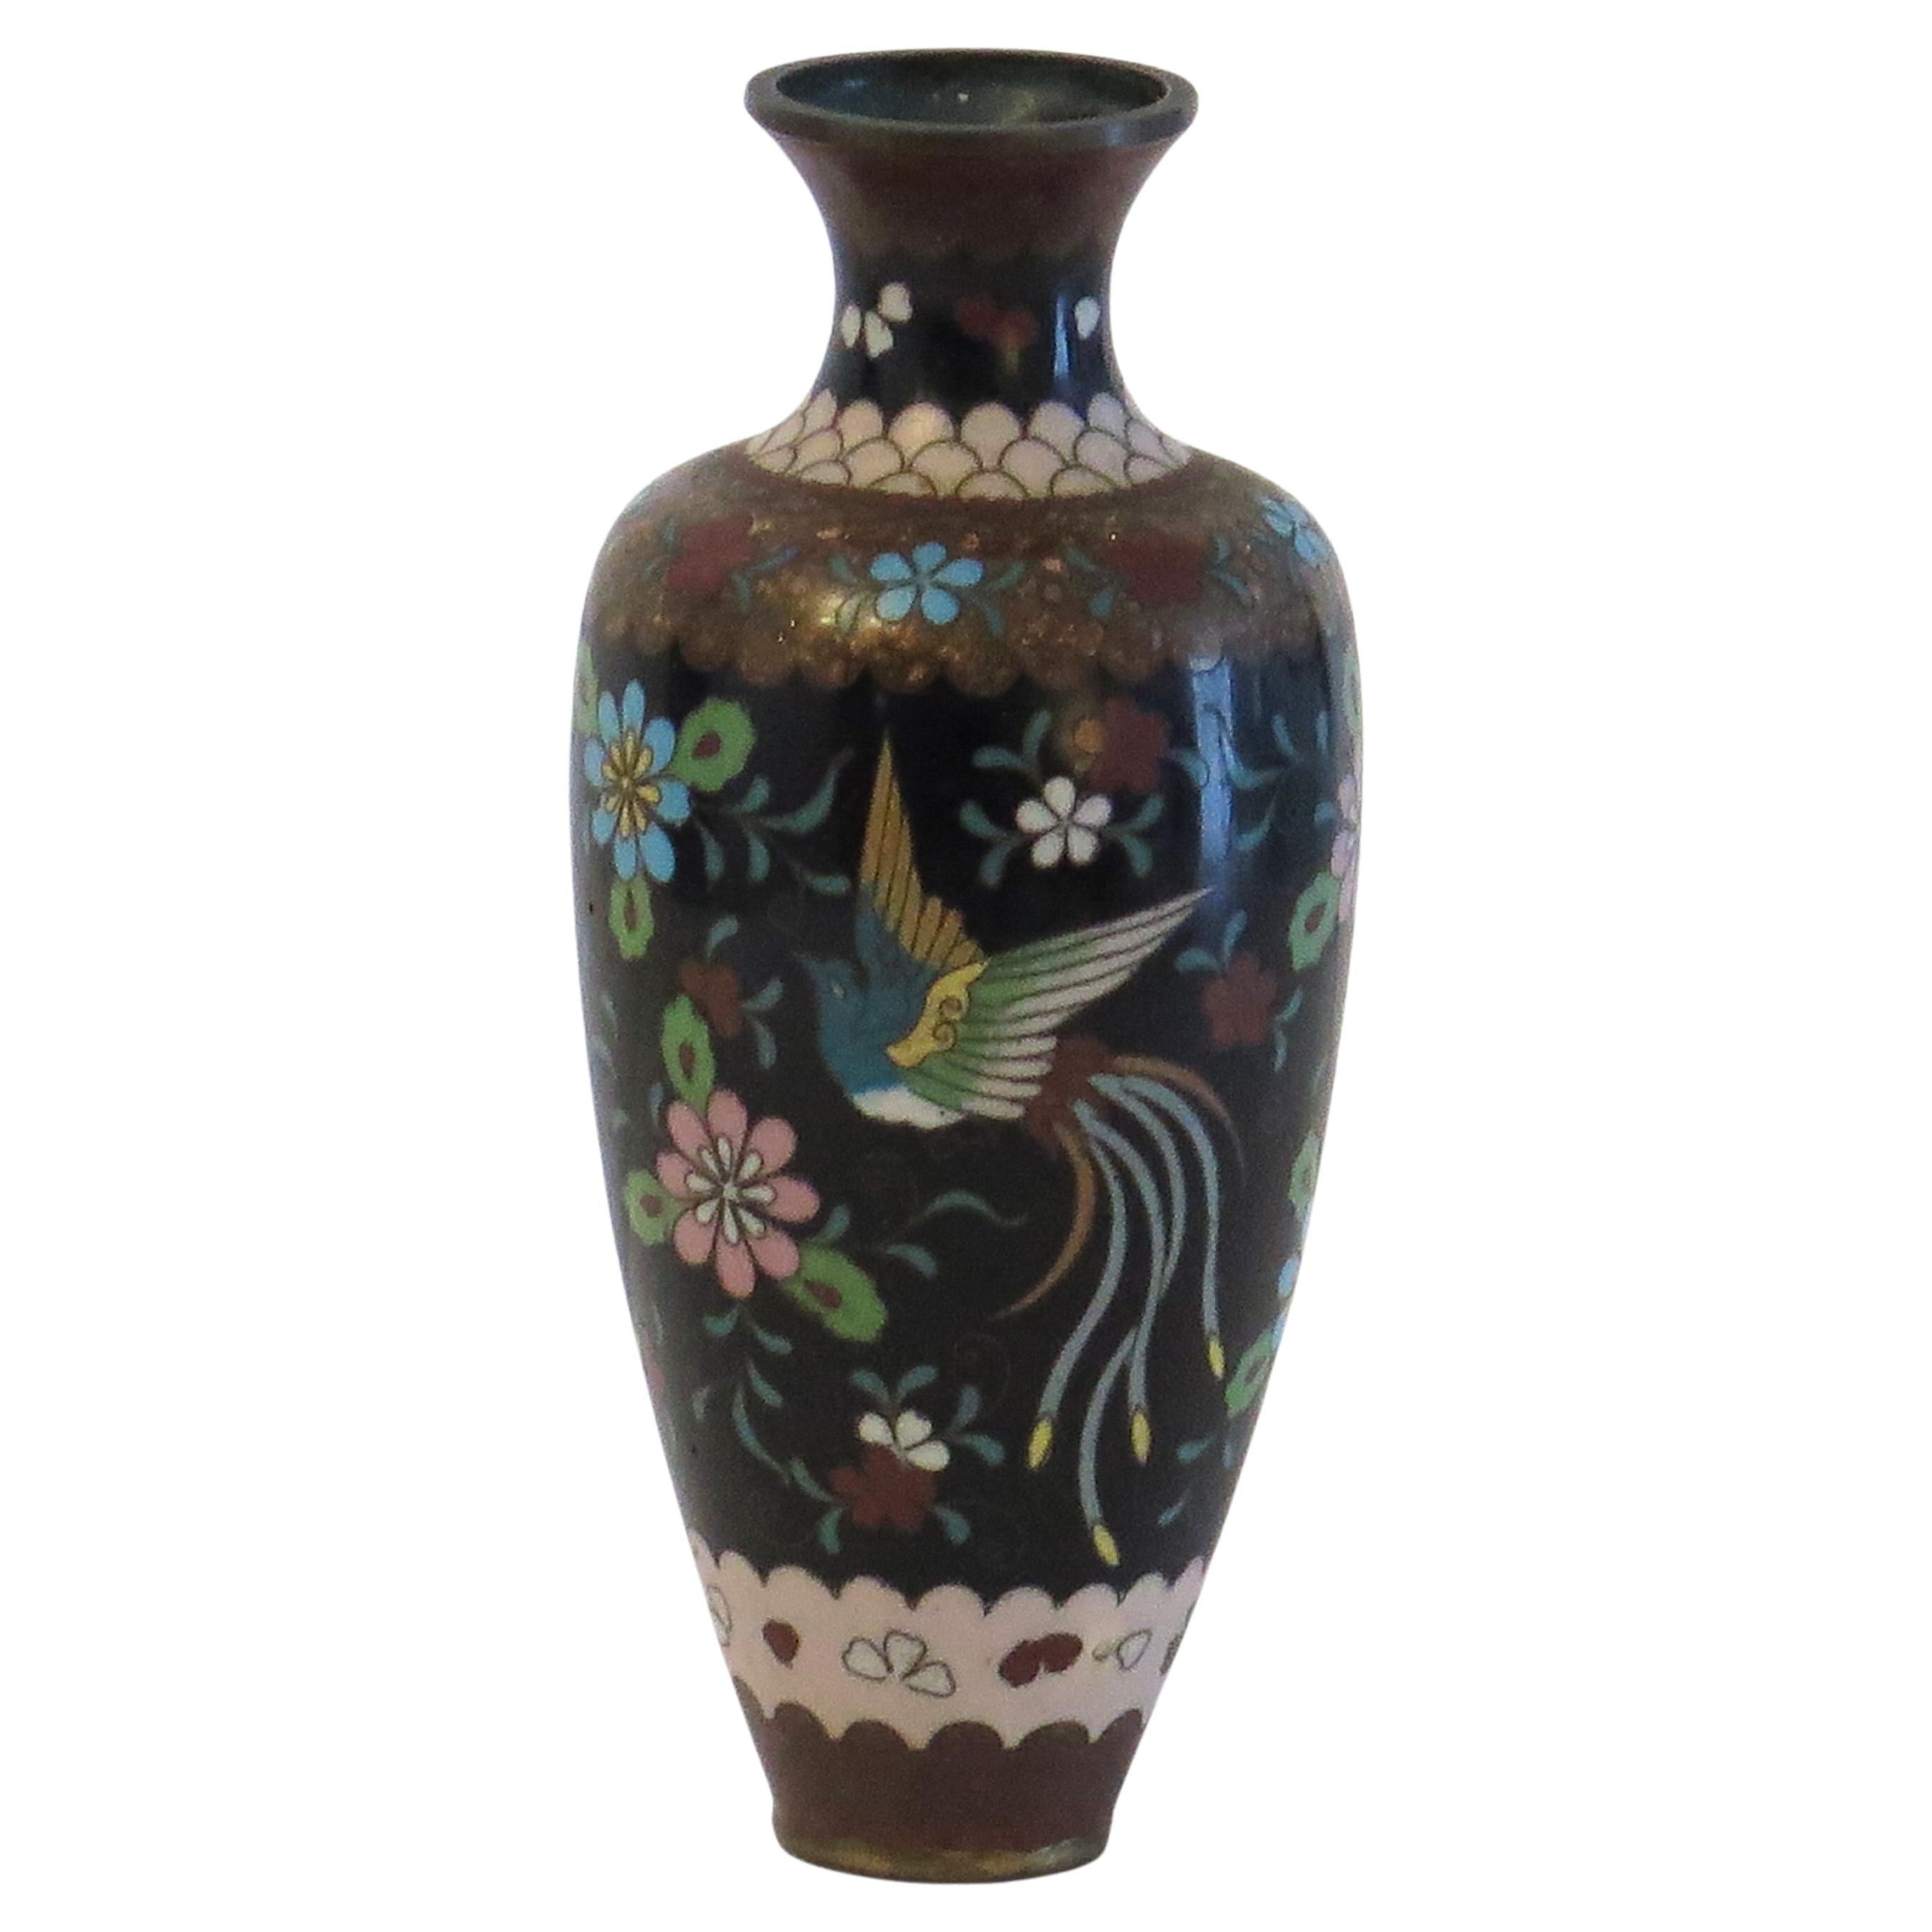 Chinese Cloisonné Vase on Bronze with Phoenixes,  19th Century Qing period 